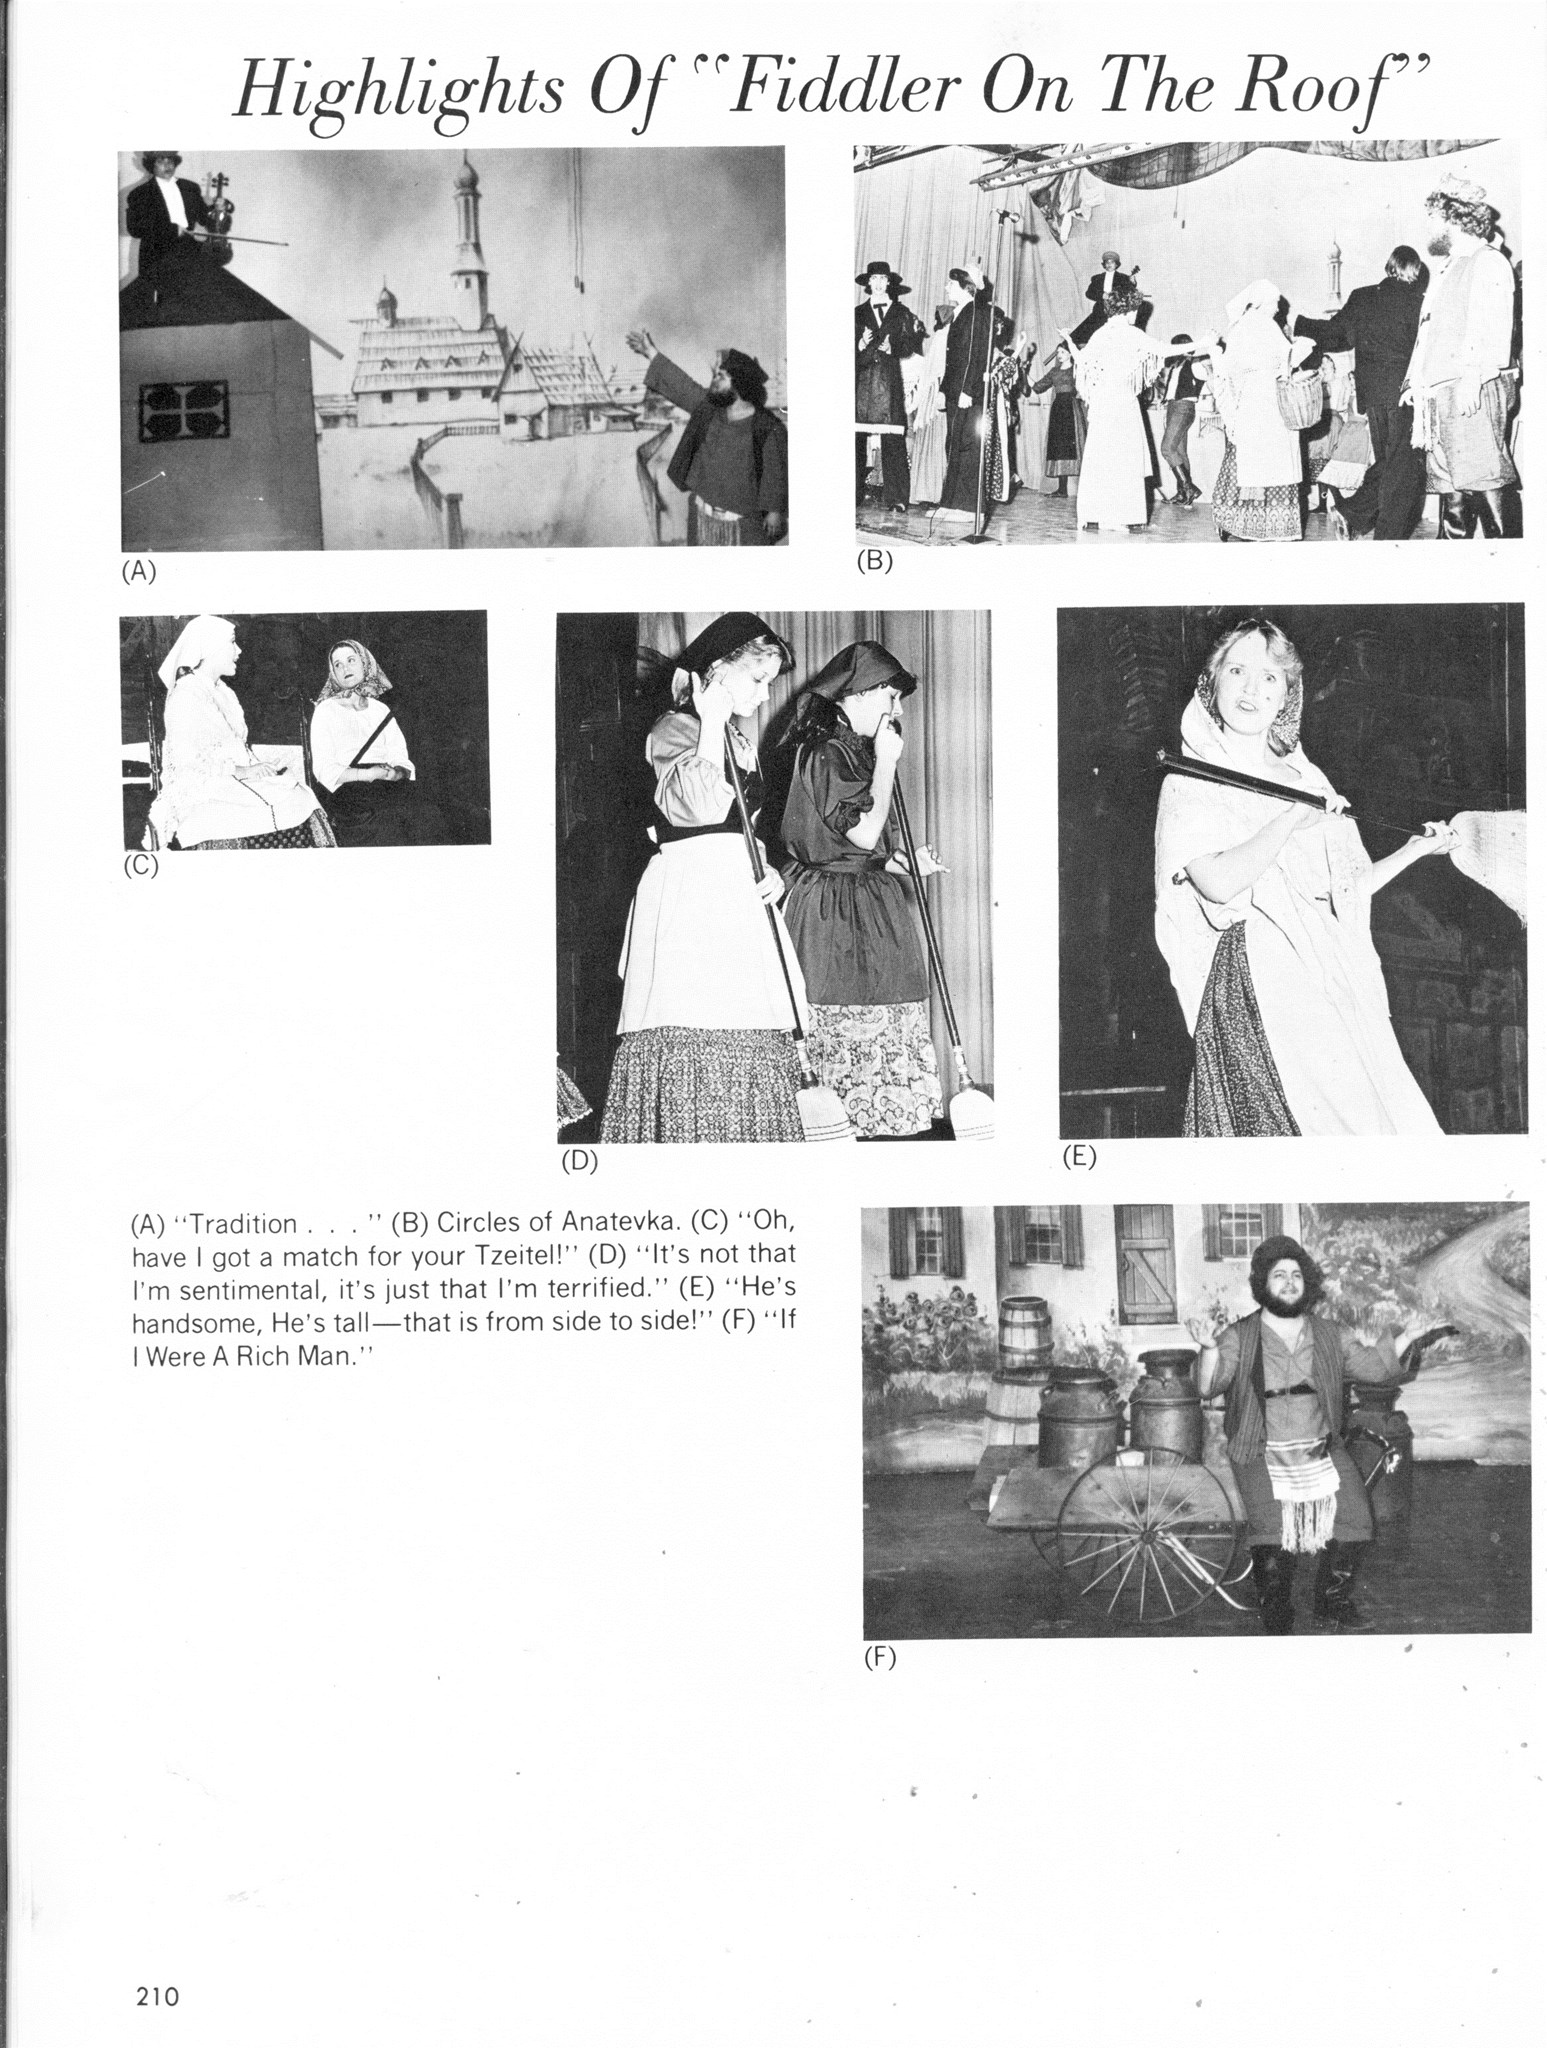 ../../../Images/Large/1978/Arclight-1978-pg0210.jpg